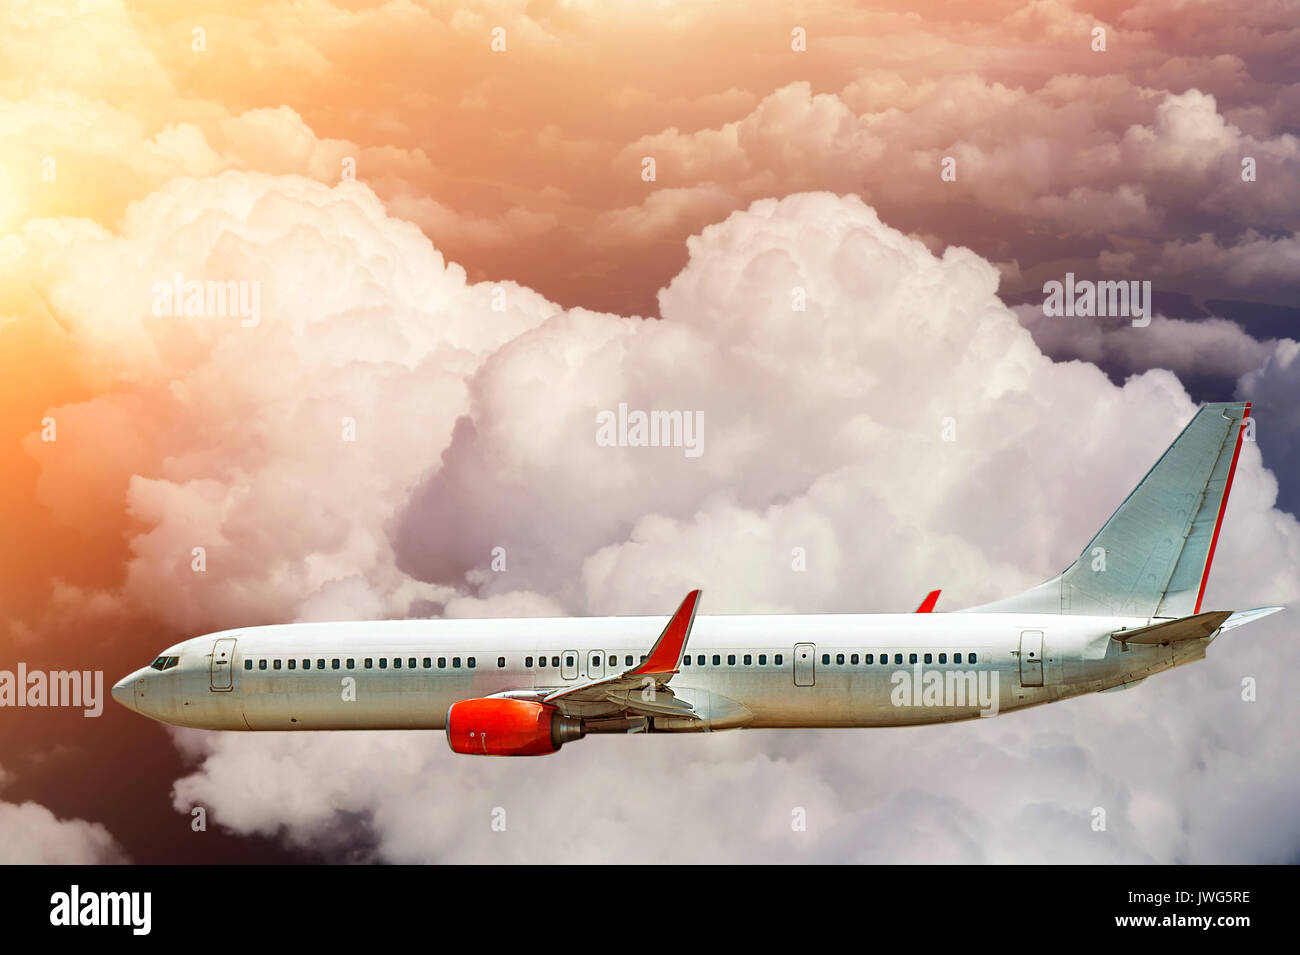 Airplane flying above clouds in sunlight. Stock Photo